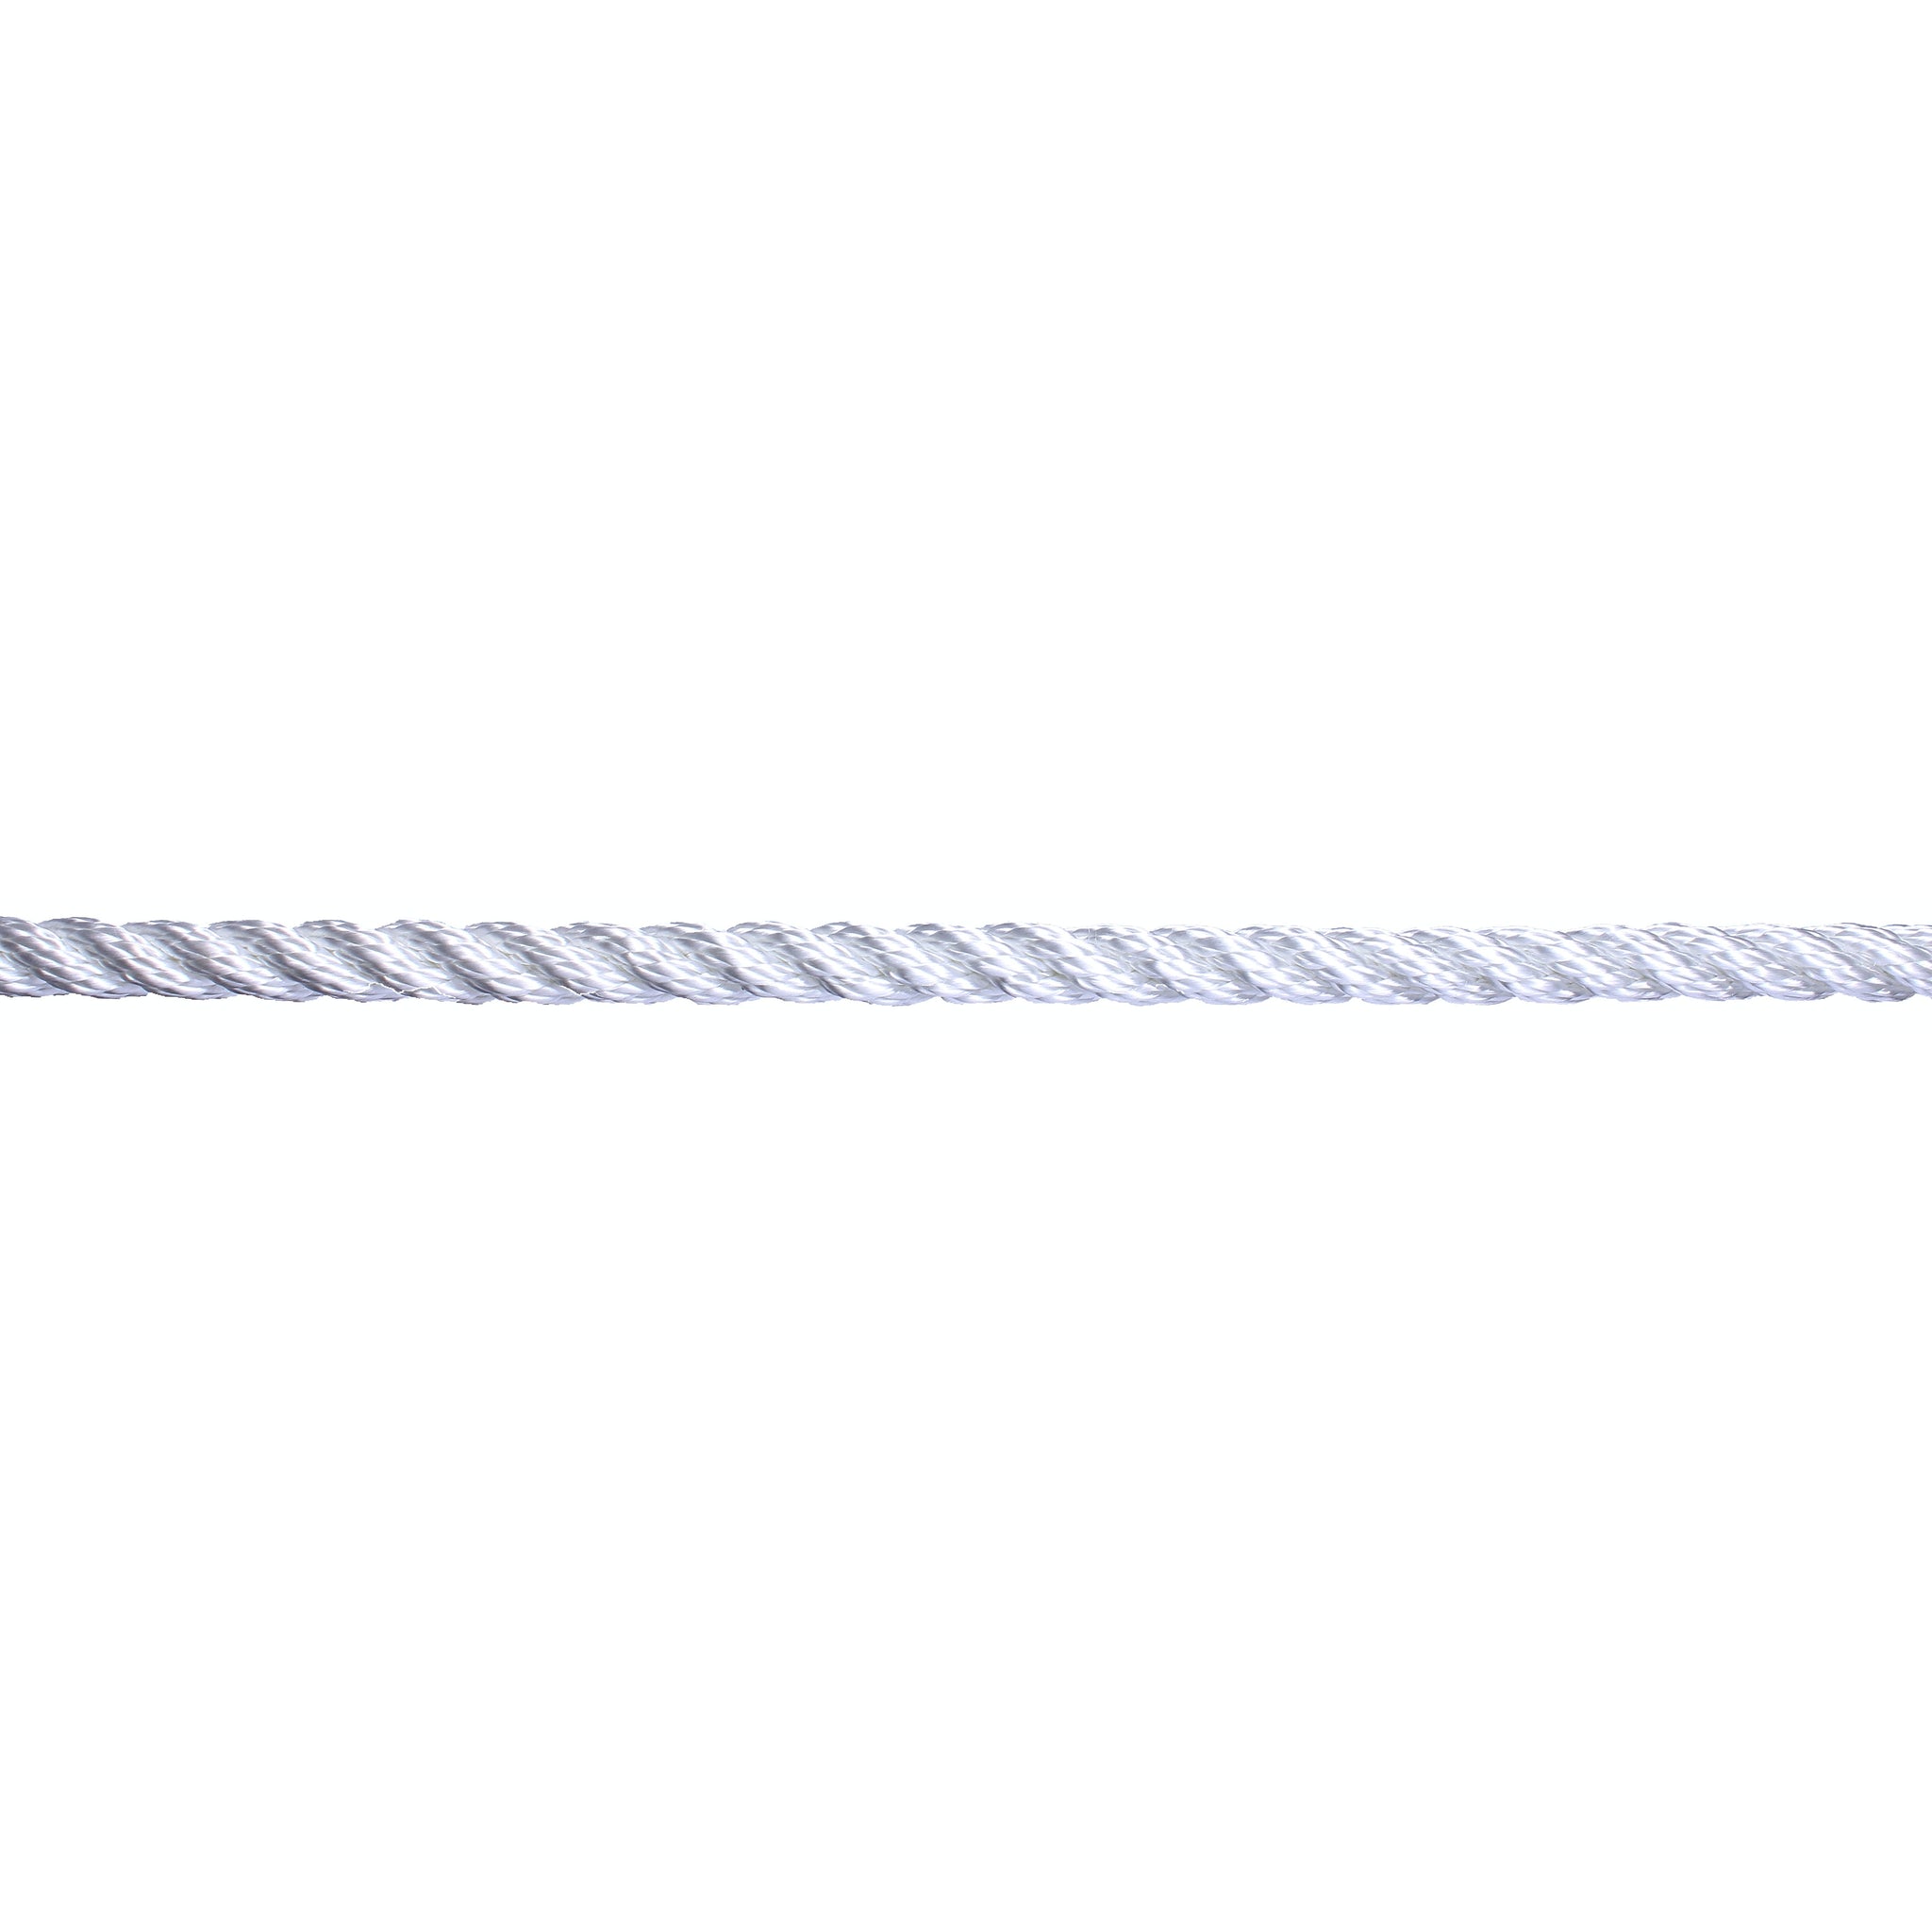 New England Ropes Spun Classic 3-Strand Polyester Rope 5/16 (8mm) White